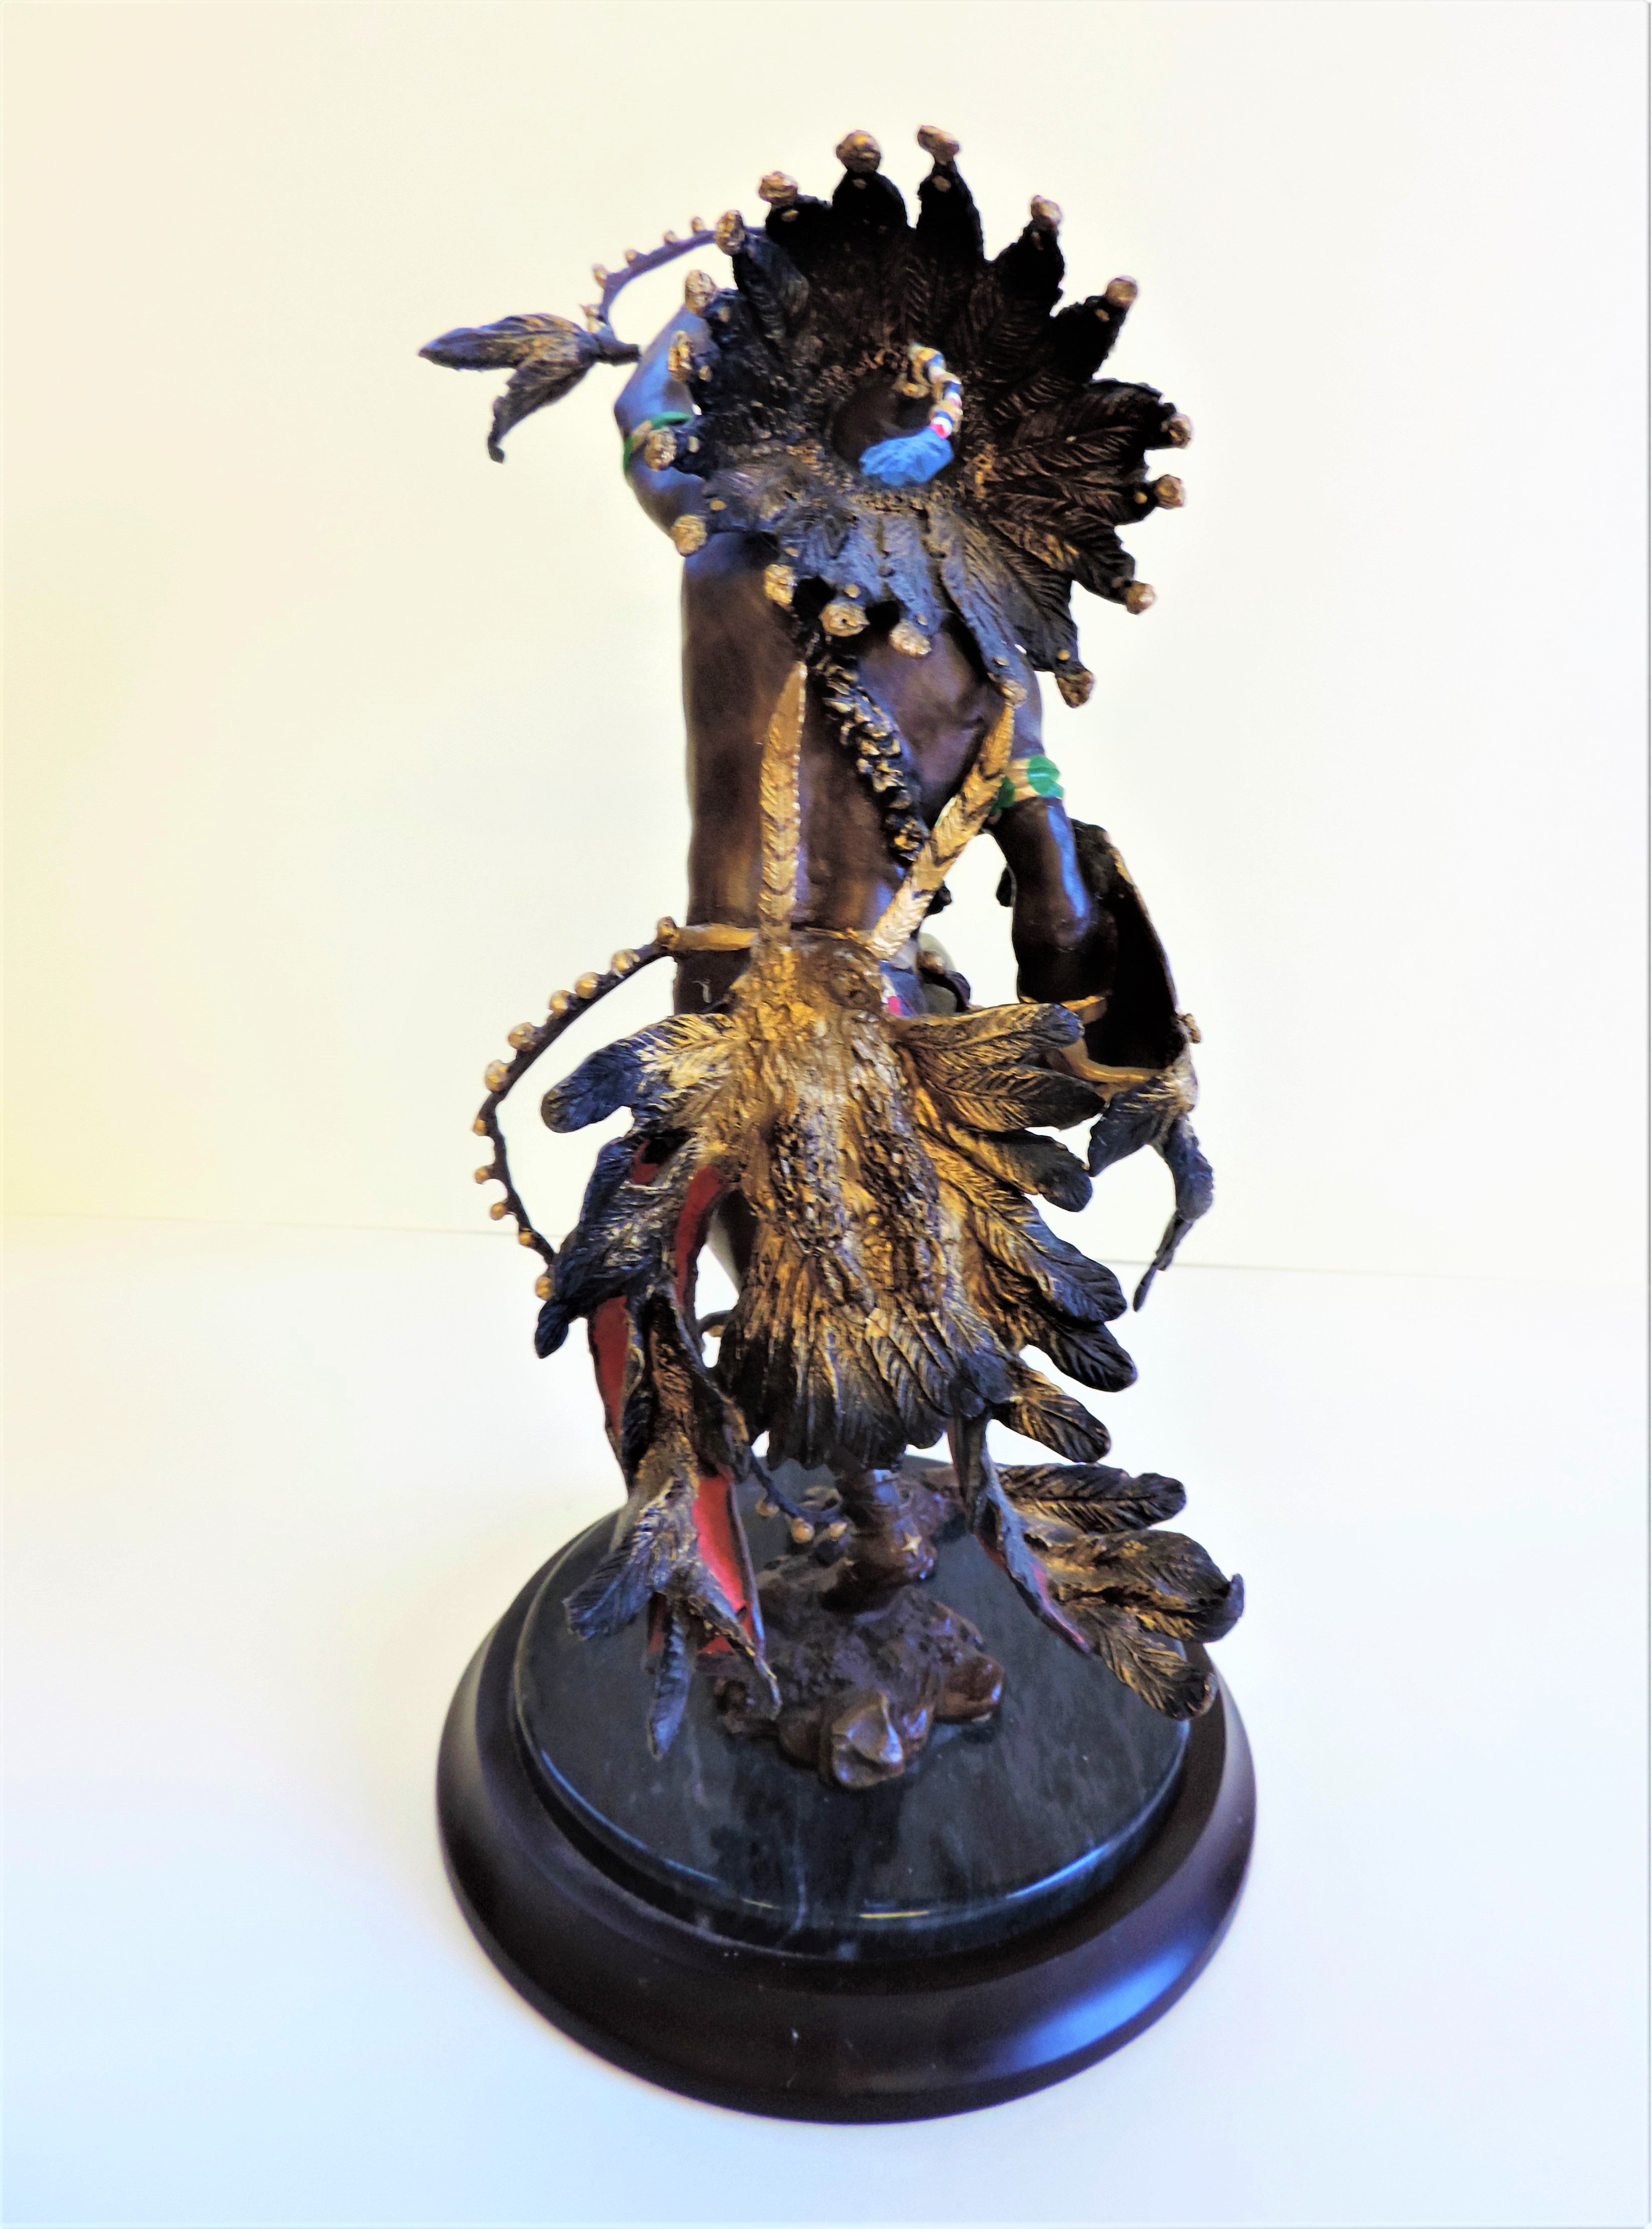 Signed Limited Edition Bronze Sculpture 'Spirit Of The Thunderbird' Franklin Mint - Image 5 of 15